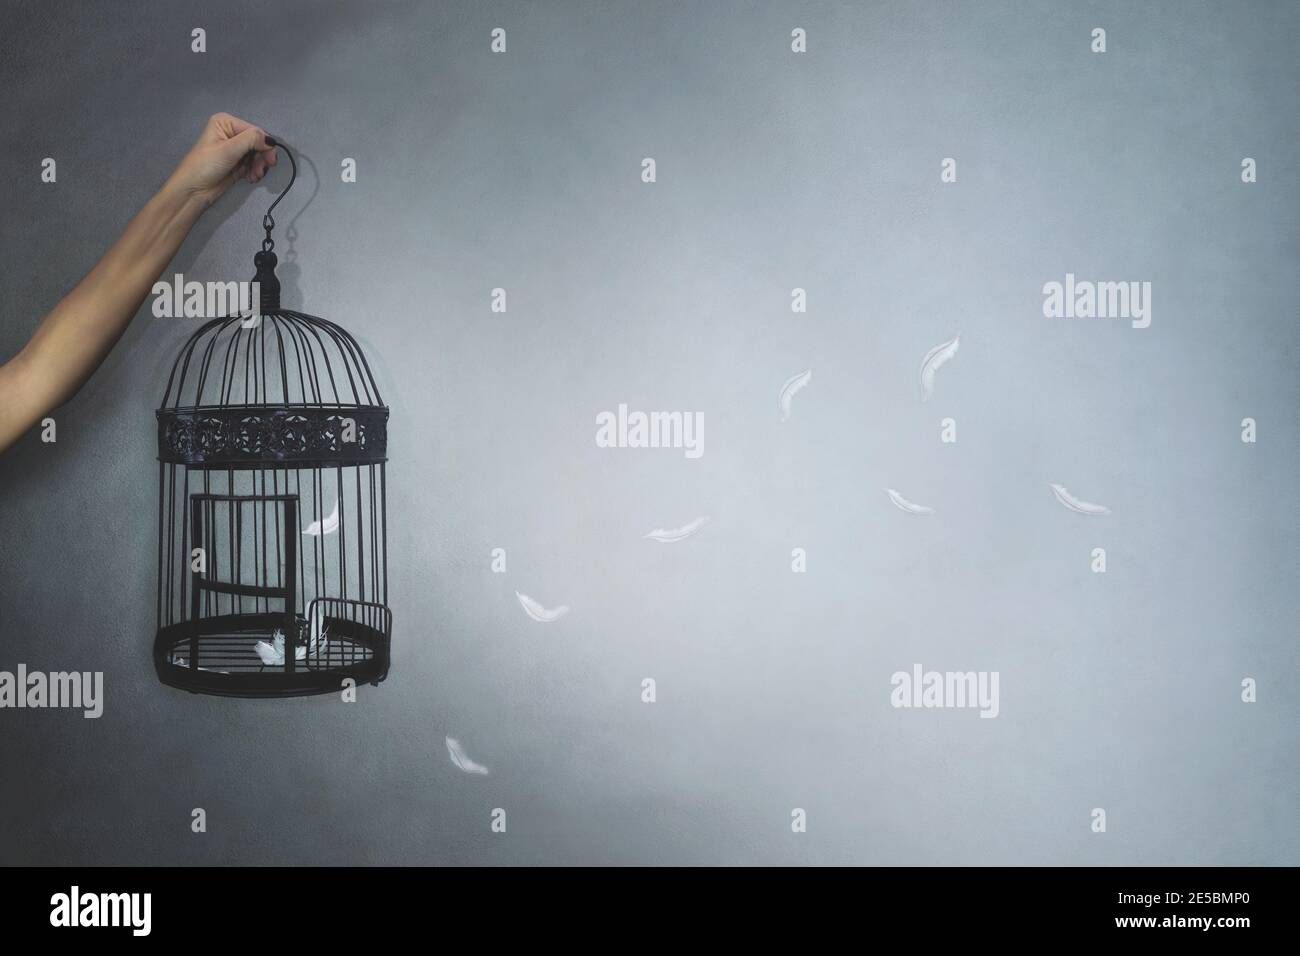 person gives freedom to a bird locked in a cage, feathers flying, concept of freedom Stock Photo